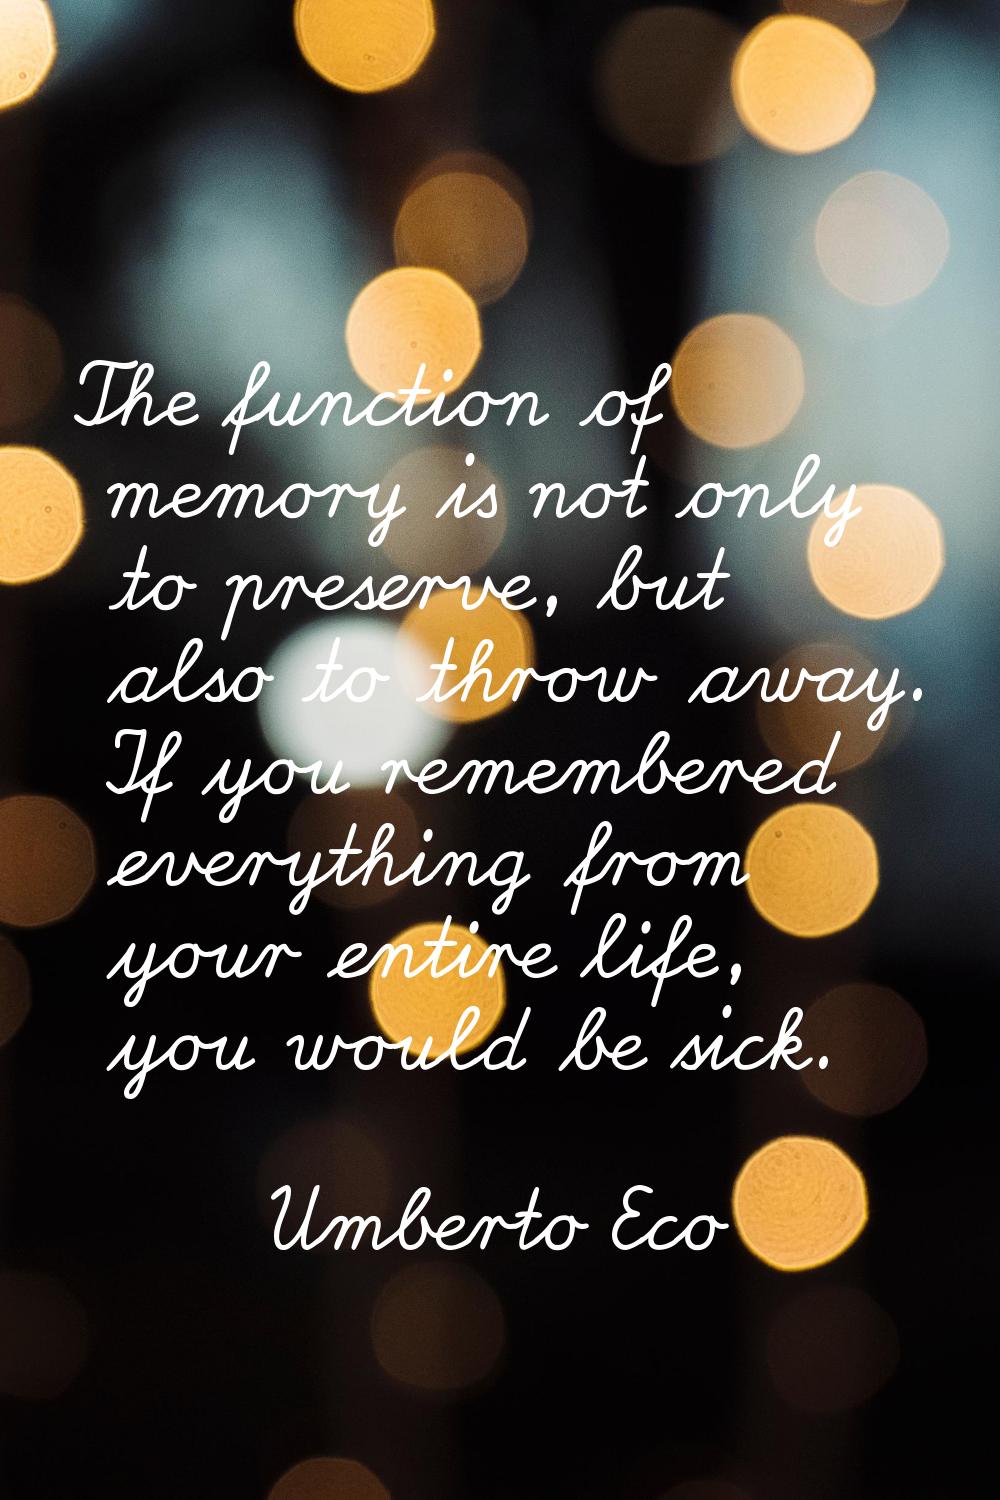 The function of memory is not only to preserve, but also to throw away. If you remembered everythin